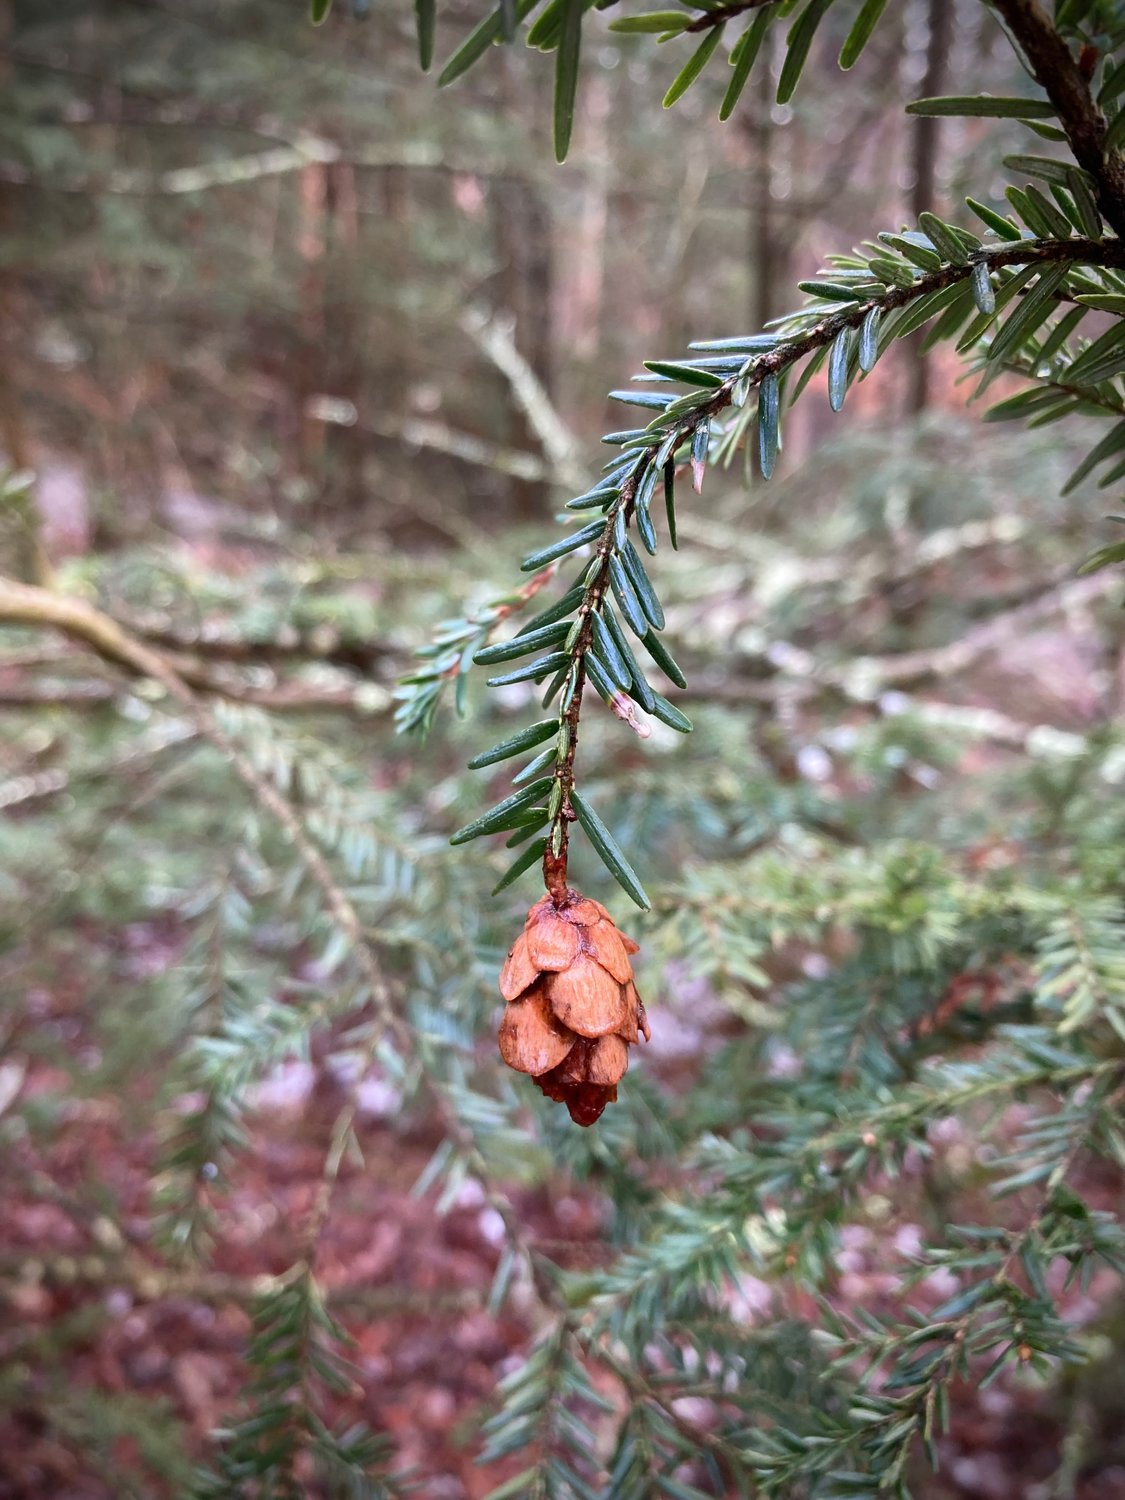 The fruit of the Eastern hemlock is an egg-shaped cone hanging singly from the tips of twigs. Under each scale are two small winged seeds.